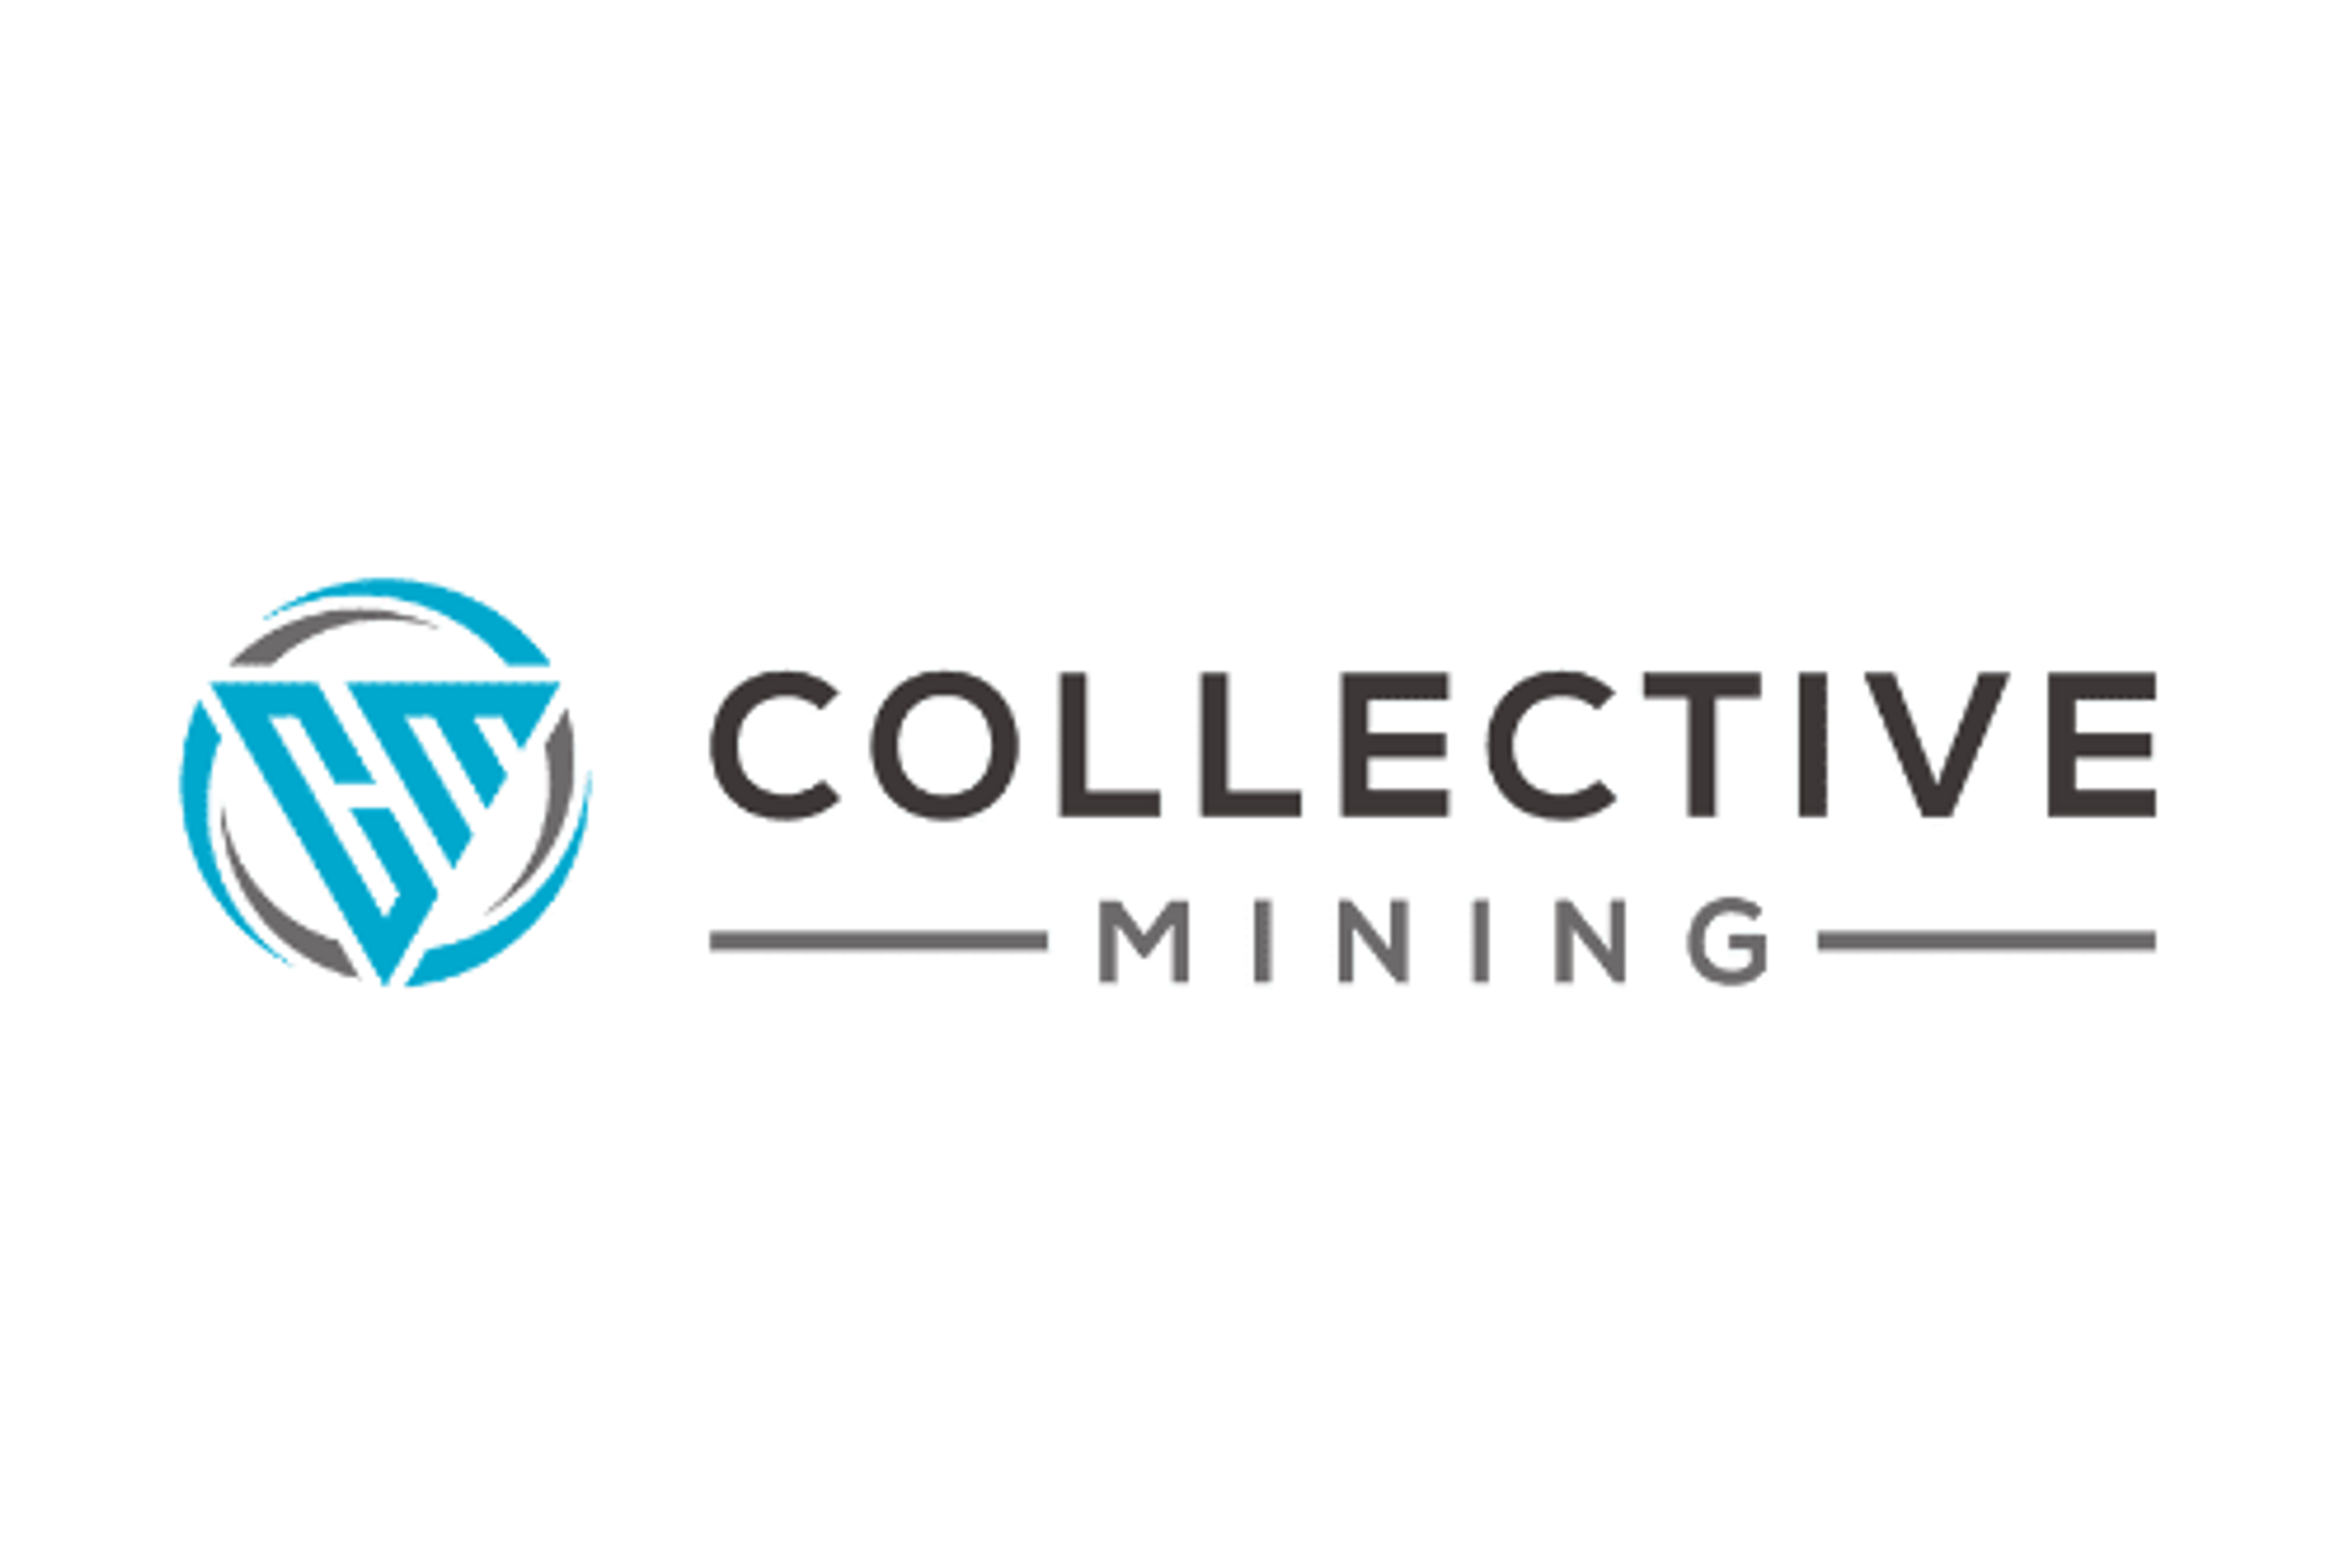 The Power Play by The Market Herald Releases New Interviews with Collective Mining, Metallic Minerals, Vertex Resource Group, and Blackrock Silver Corp.